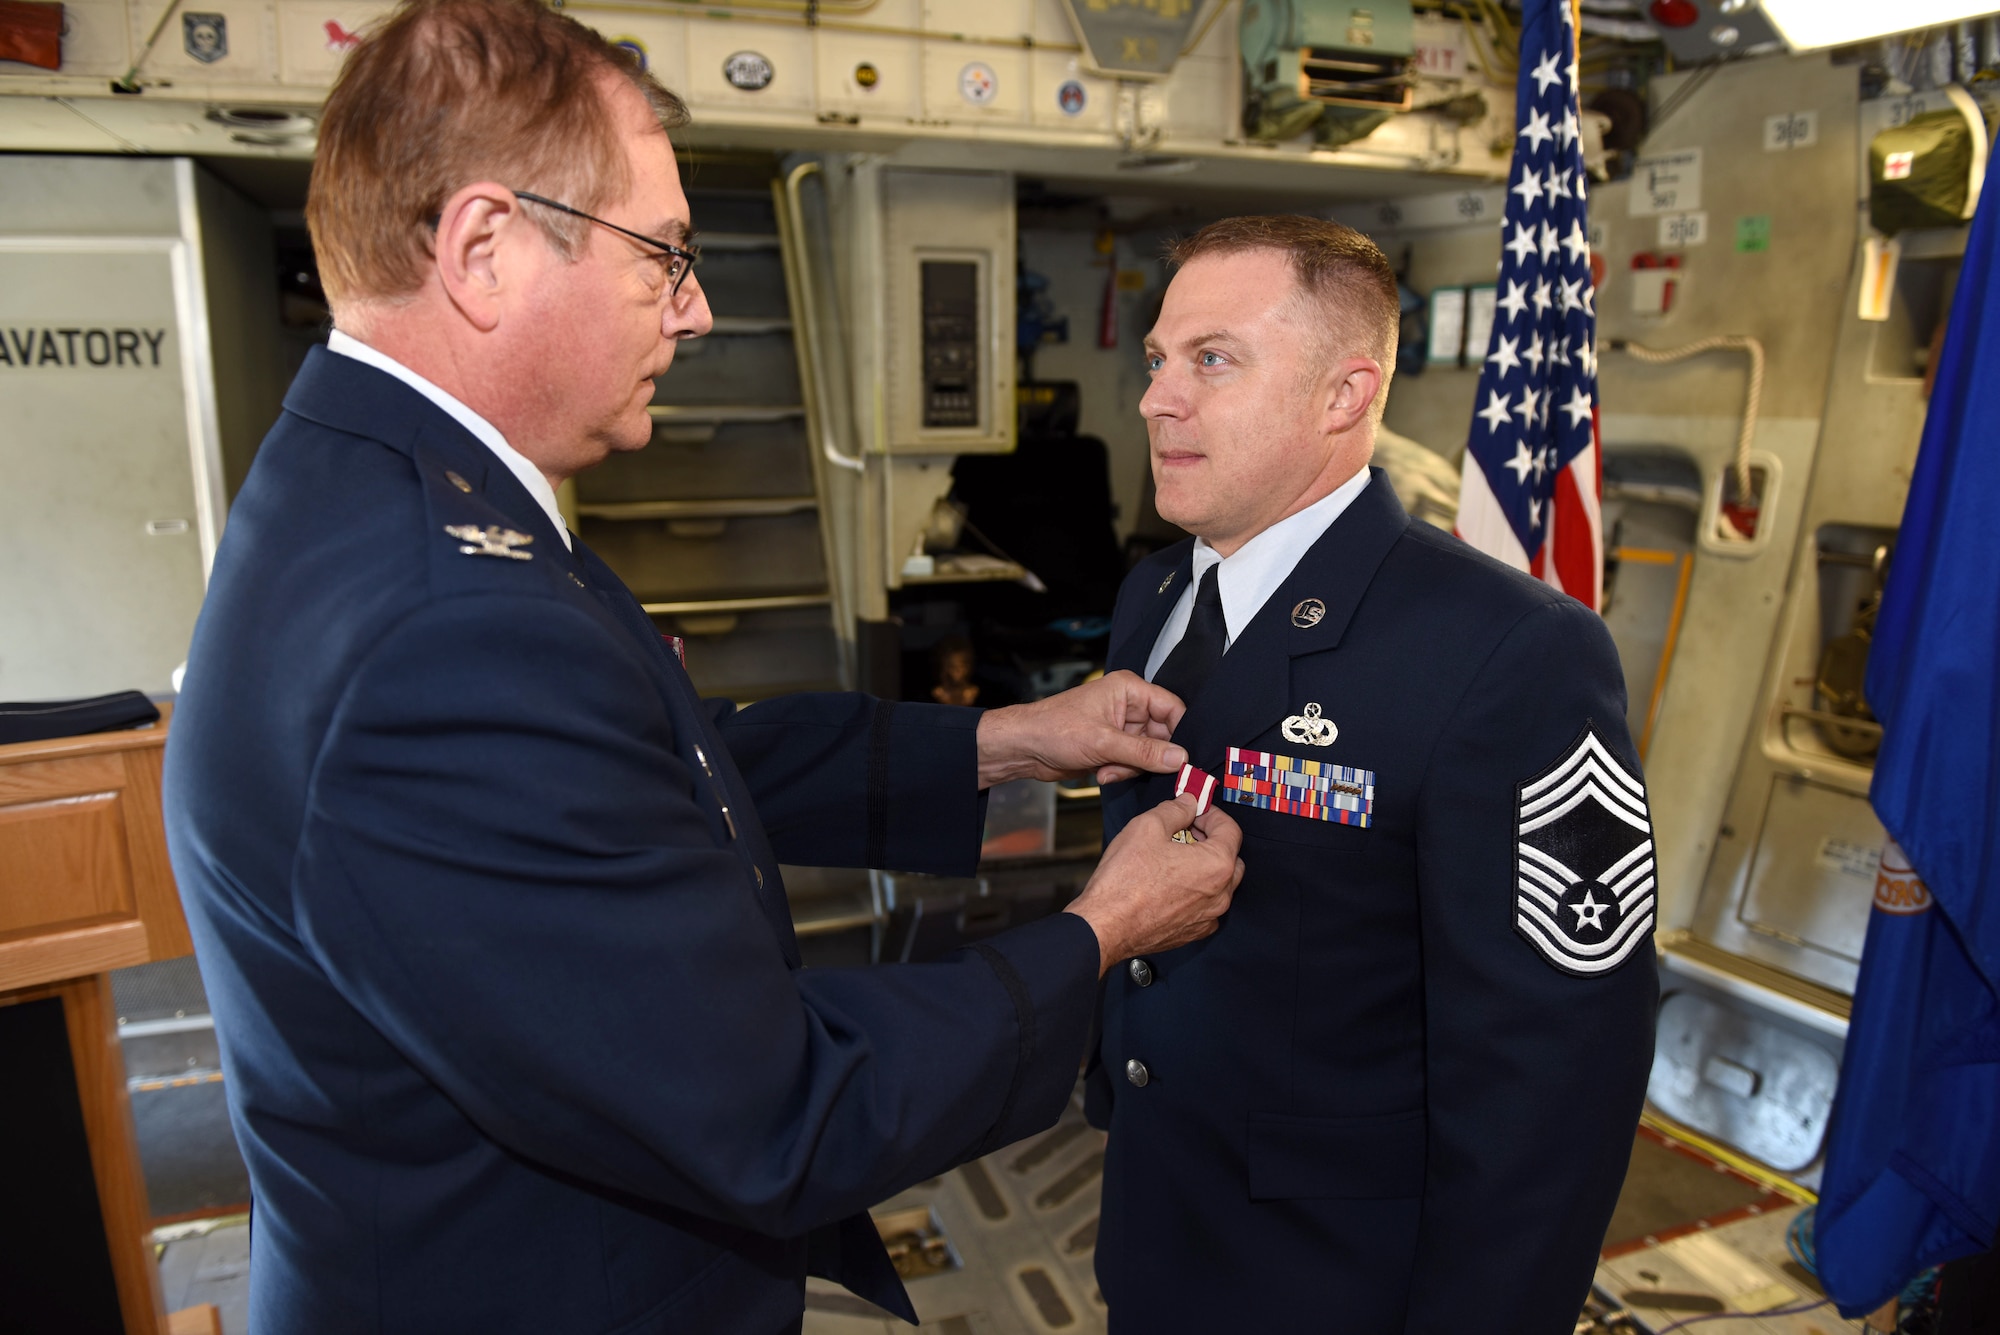 911th Maintenance Group Commander Col. Clifford Waller presents Chief Master Sgt. Timothy J. Stevens with the meritorious service medal during a chief induction ceremony at the Pittsburgh International Airport Air Reserve Station, Pennsylvania, Oct. 5, 2019.